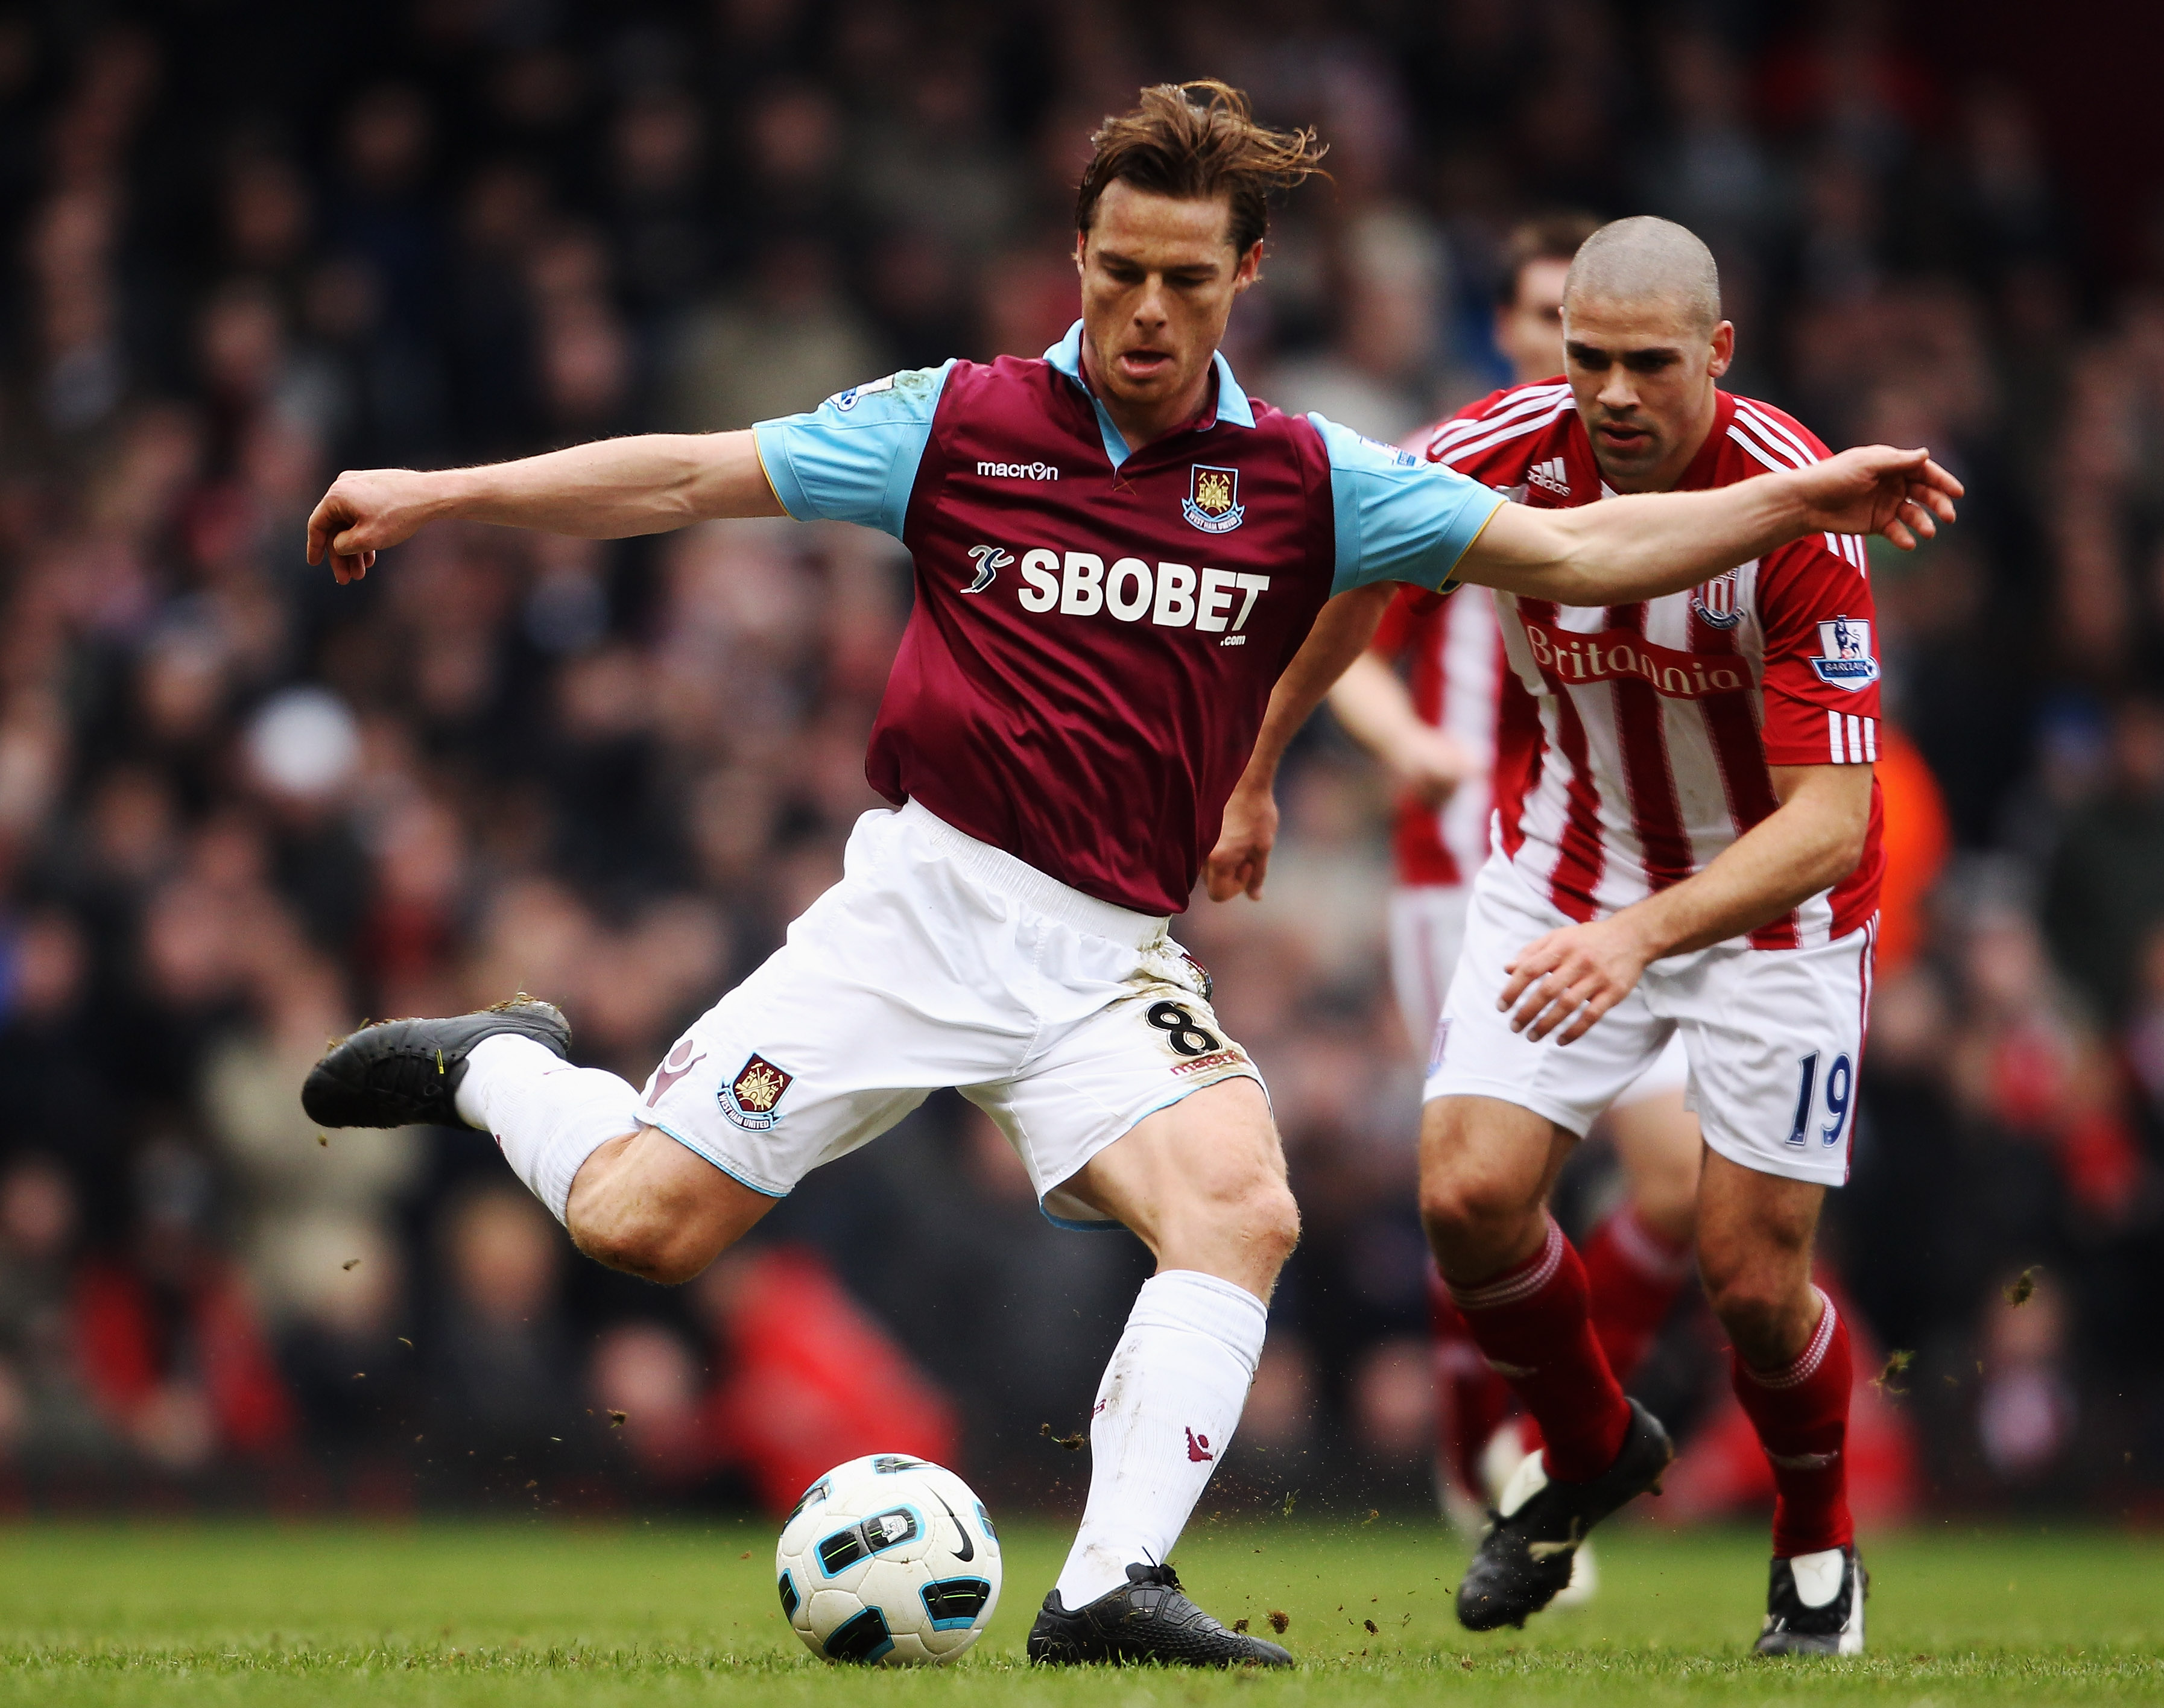 LONDON, UNITED KINGDOM - MARCH 05:  Scott Parker of West Ham United controls the ball during the Barclays Premier League match between West Ham United and Stoke City at the Boleyn Ground on March 5, 2011 in London, England.  (Photo by Scott Heavey/Getty I